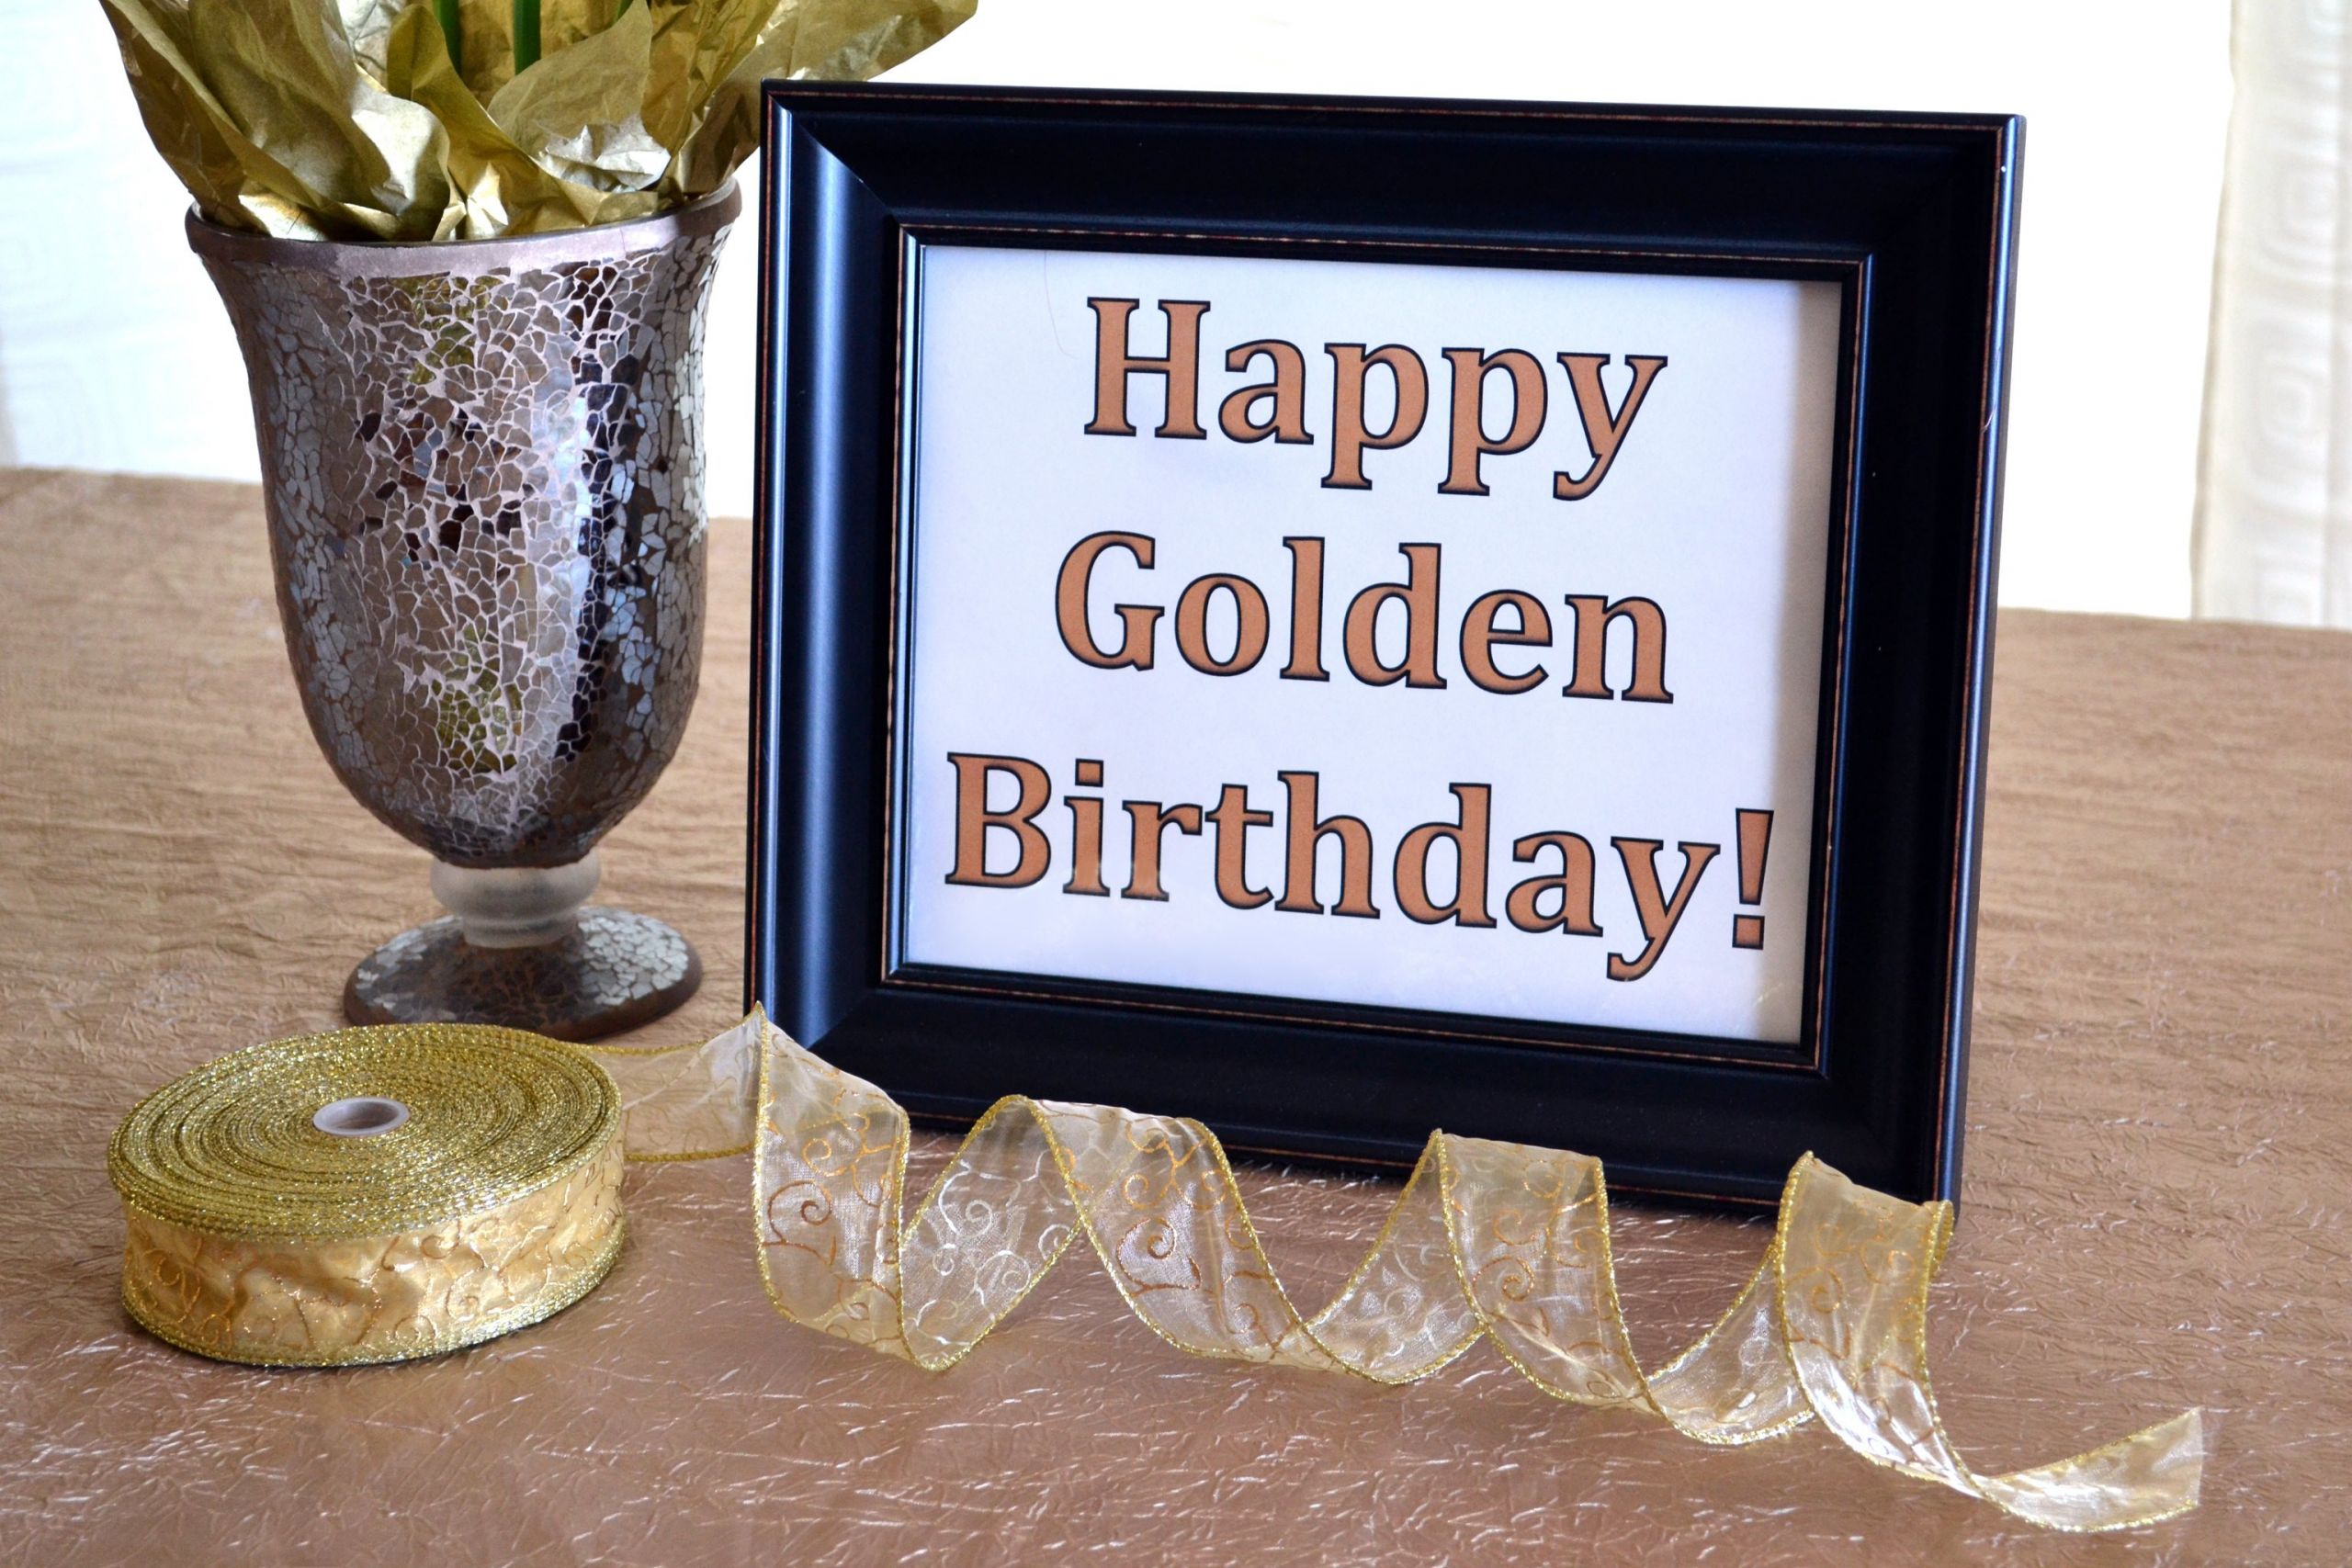 Golden Birthday Party Ideas
 Ideas for a Golden Birthday Party with